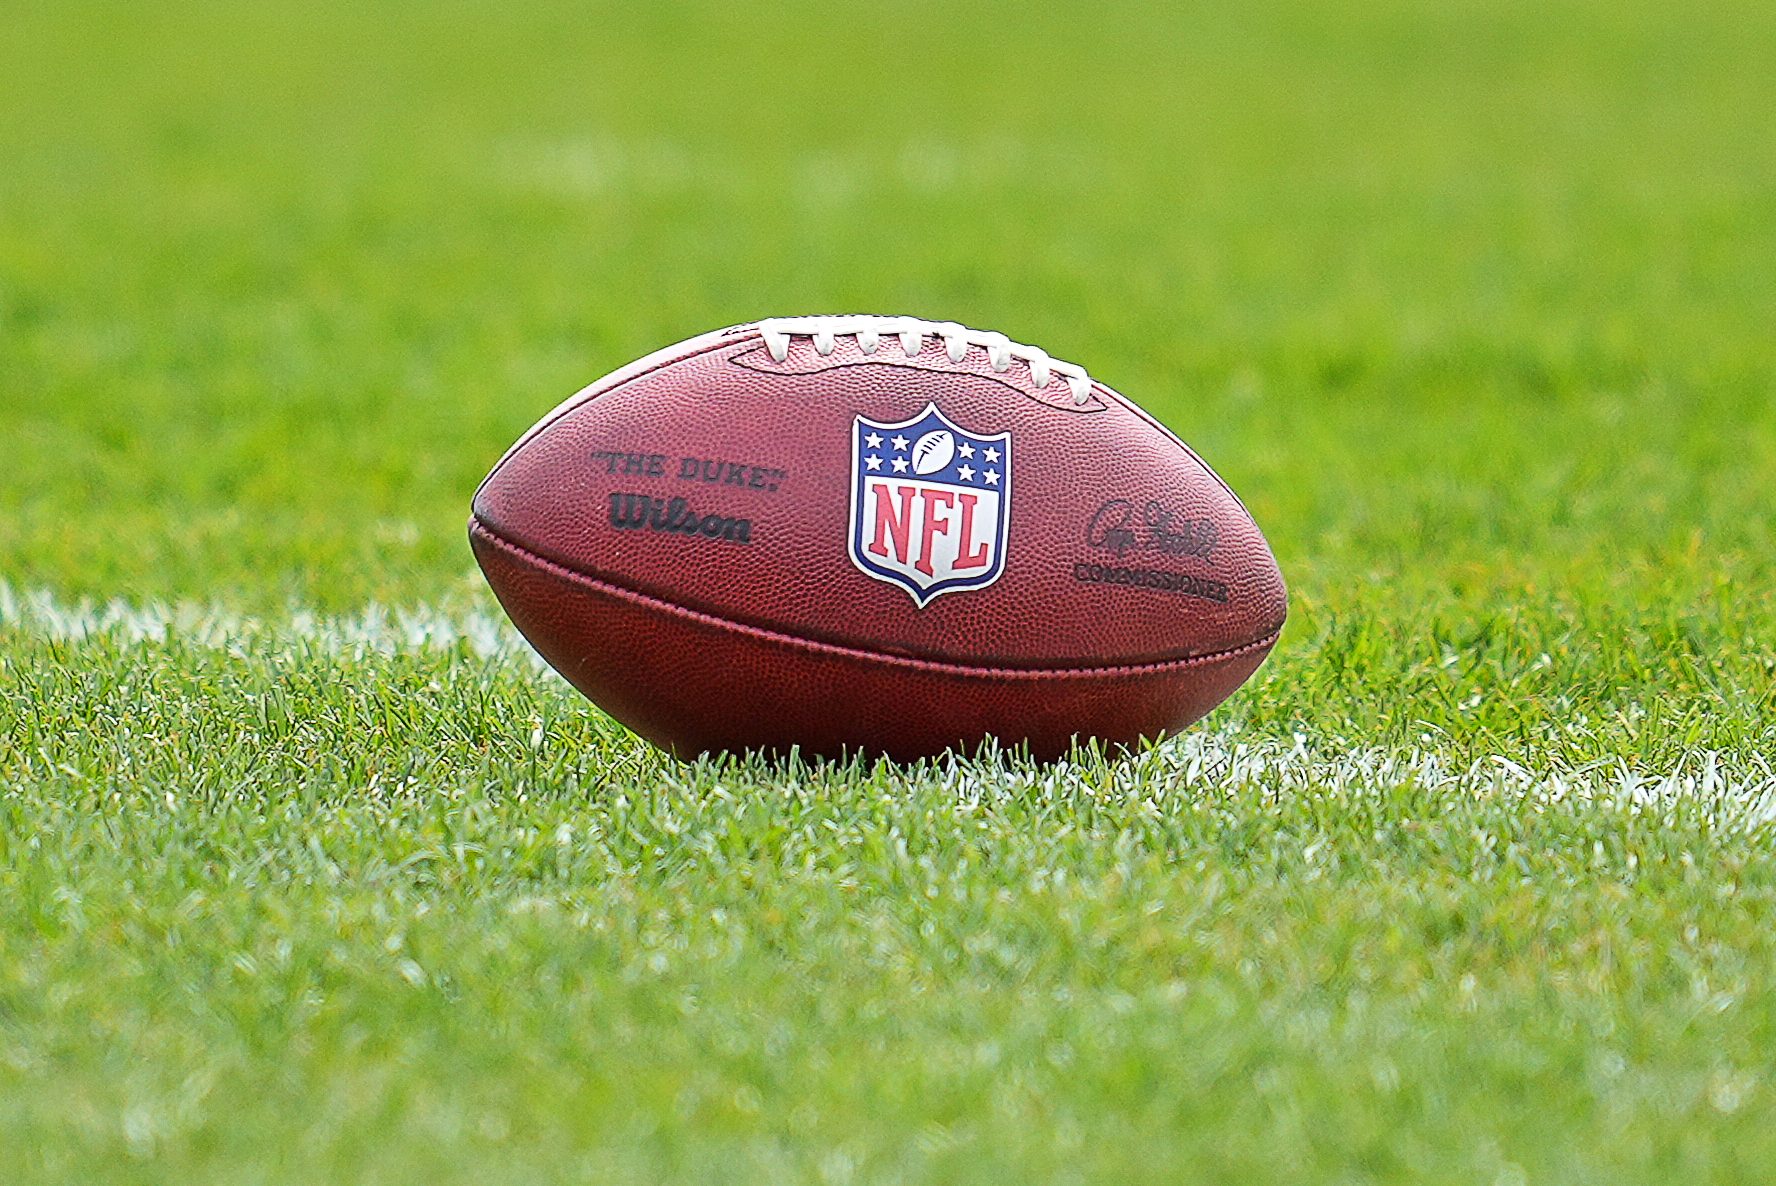 NFL Sunday Ticket Games to be Sold to Bars Through Everpass – The